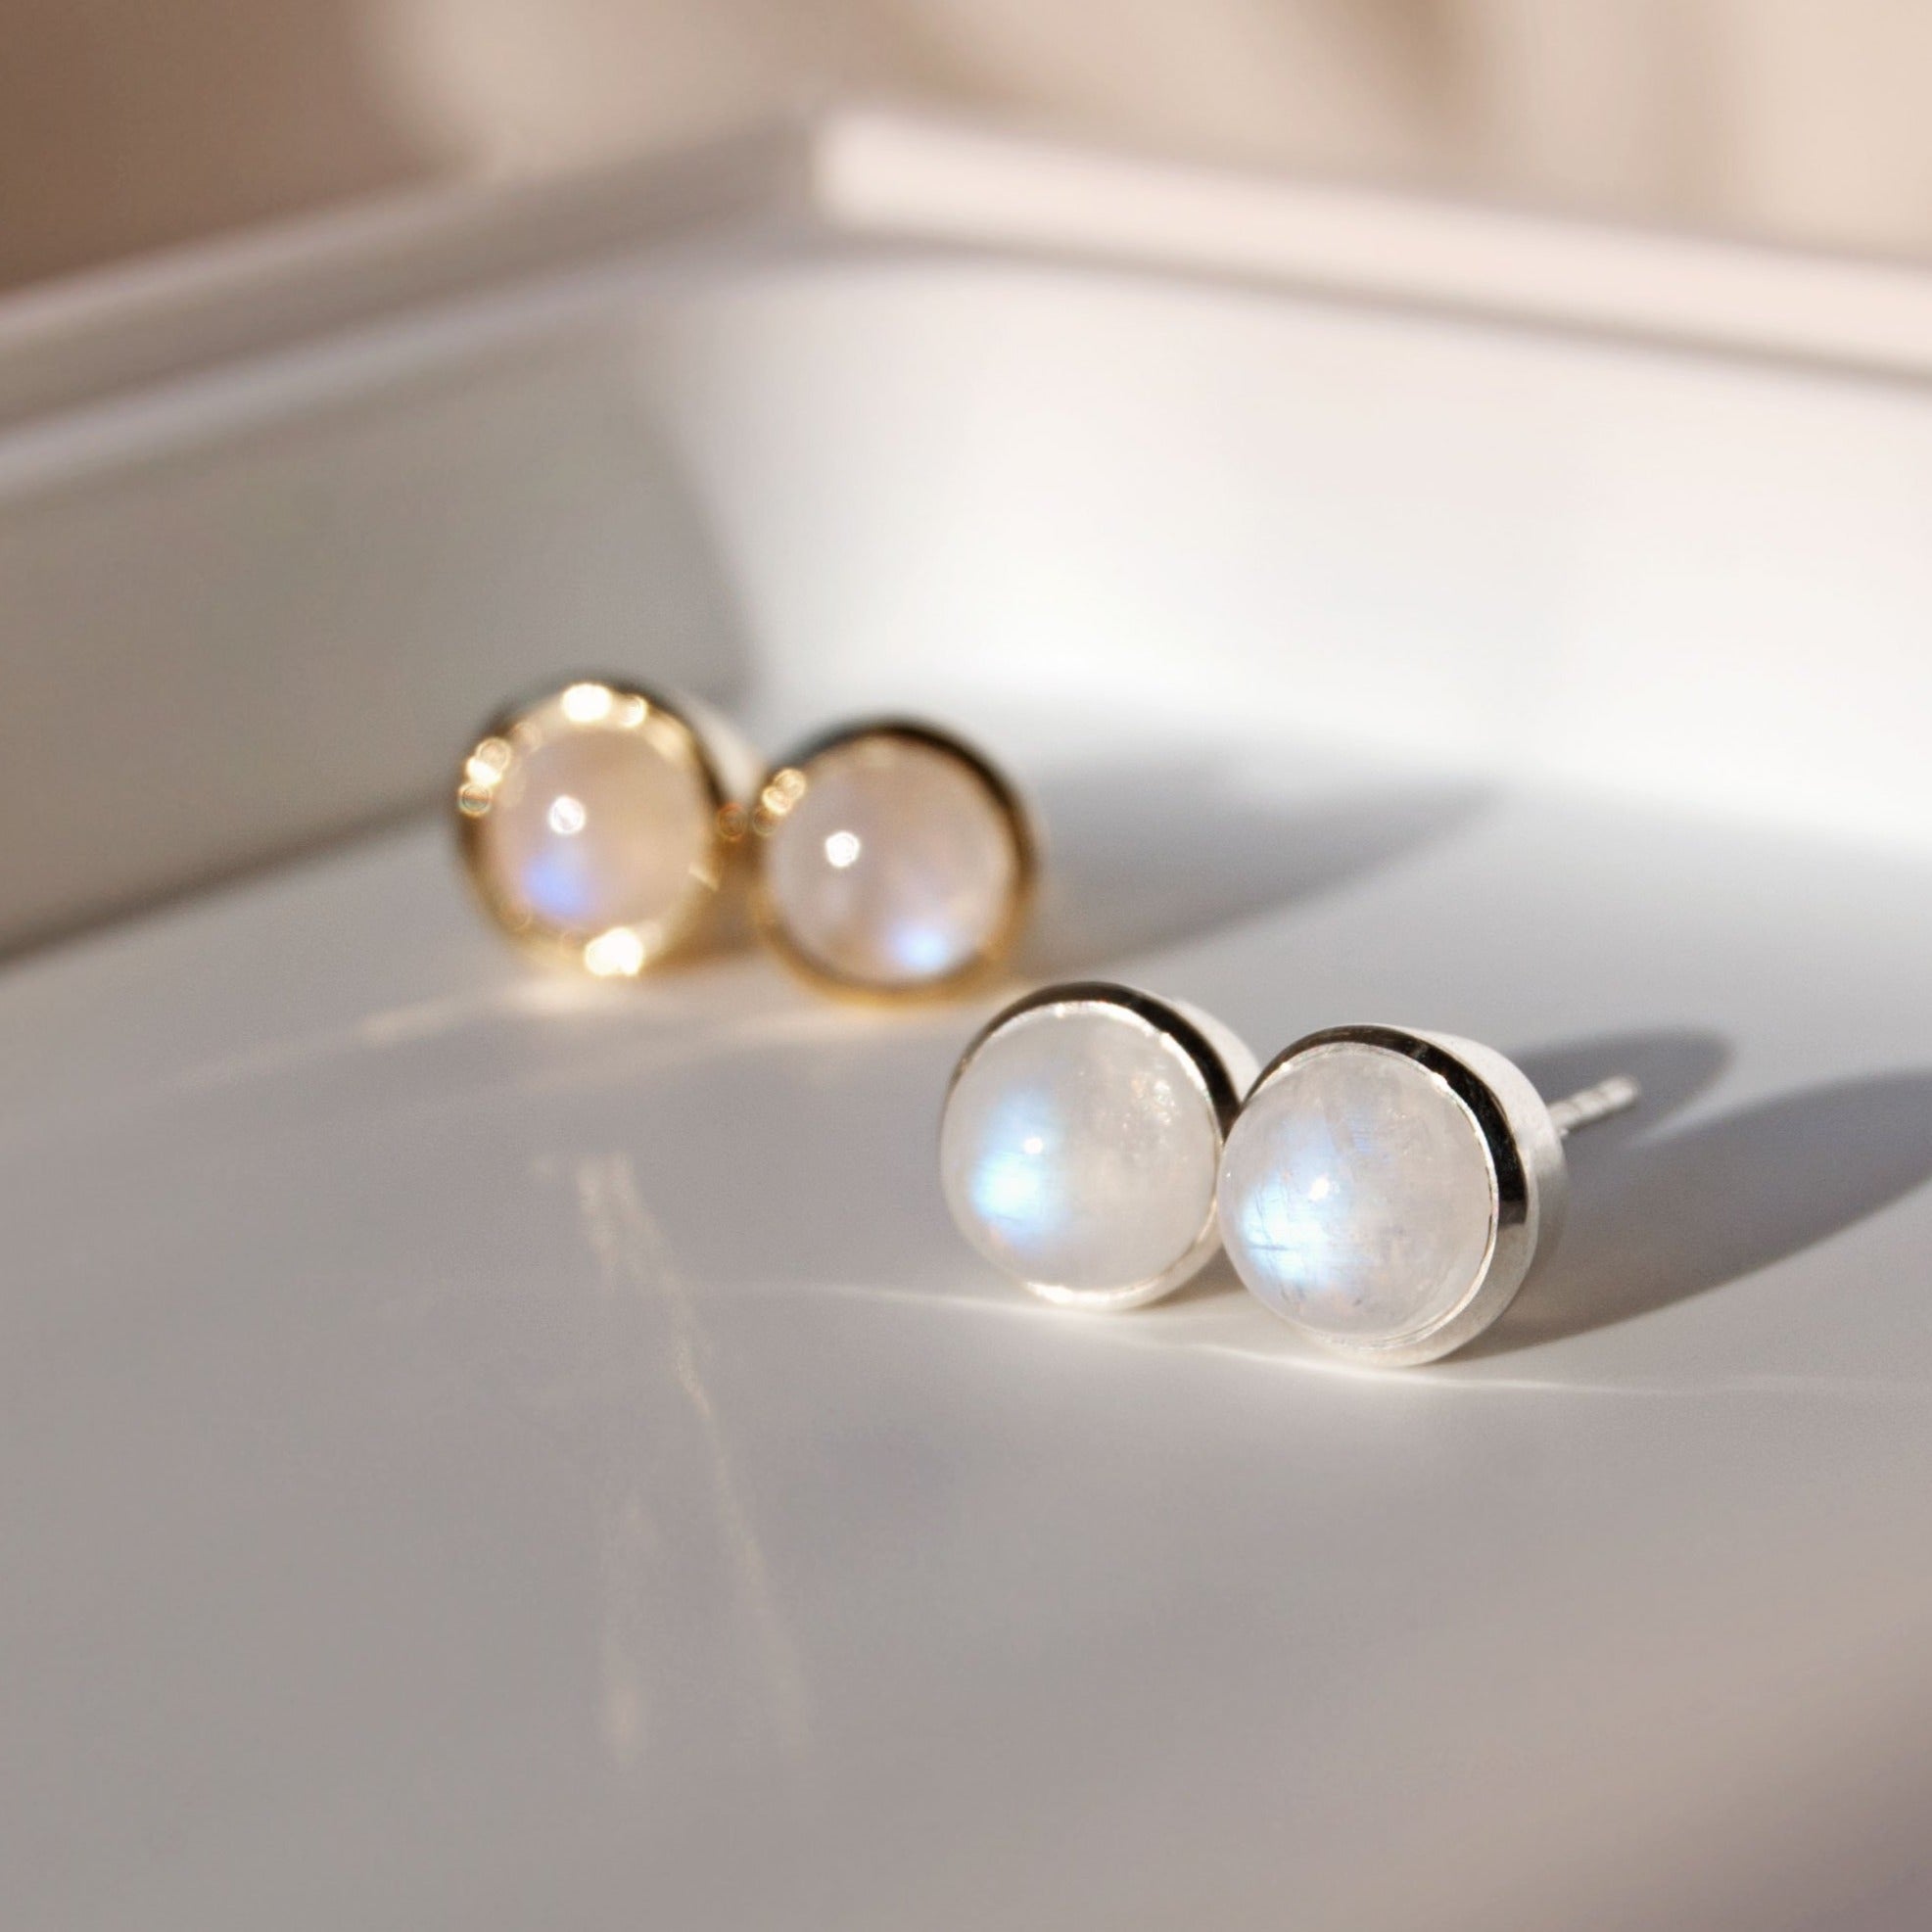 moonstone stud earrings in silver and gold